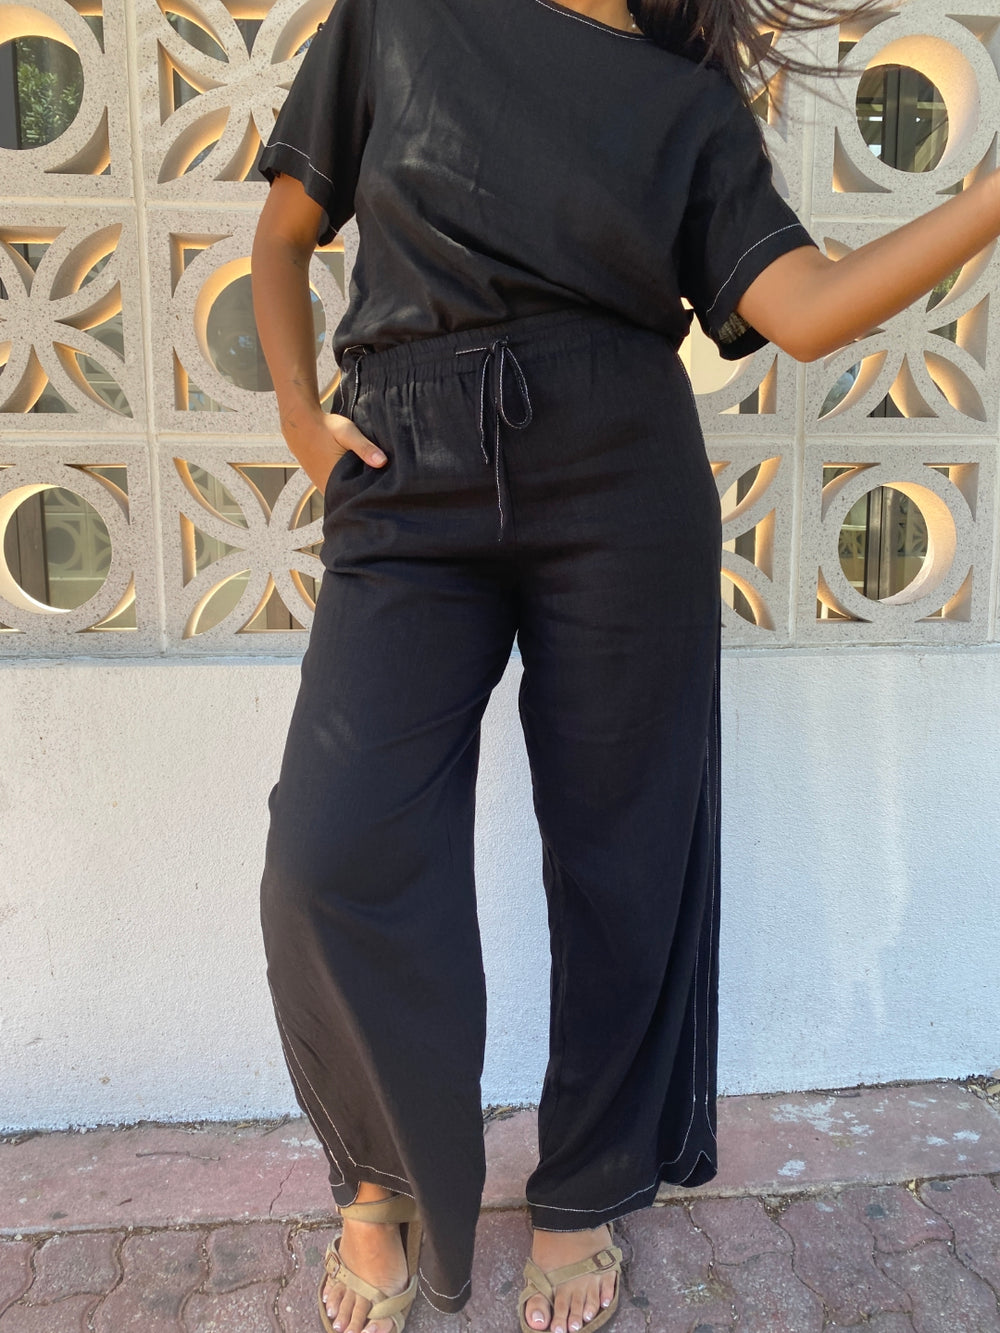 Trieste Pants from Label of Love